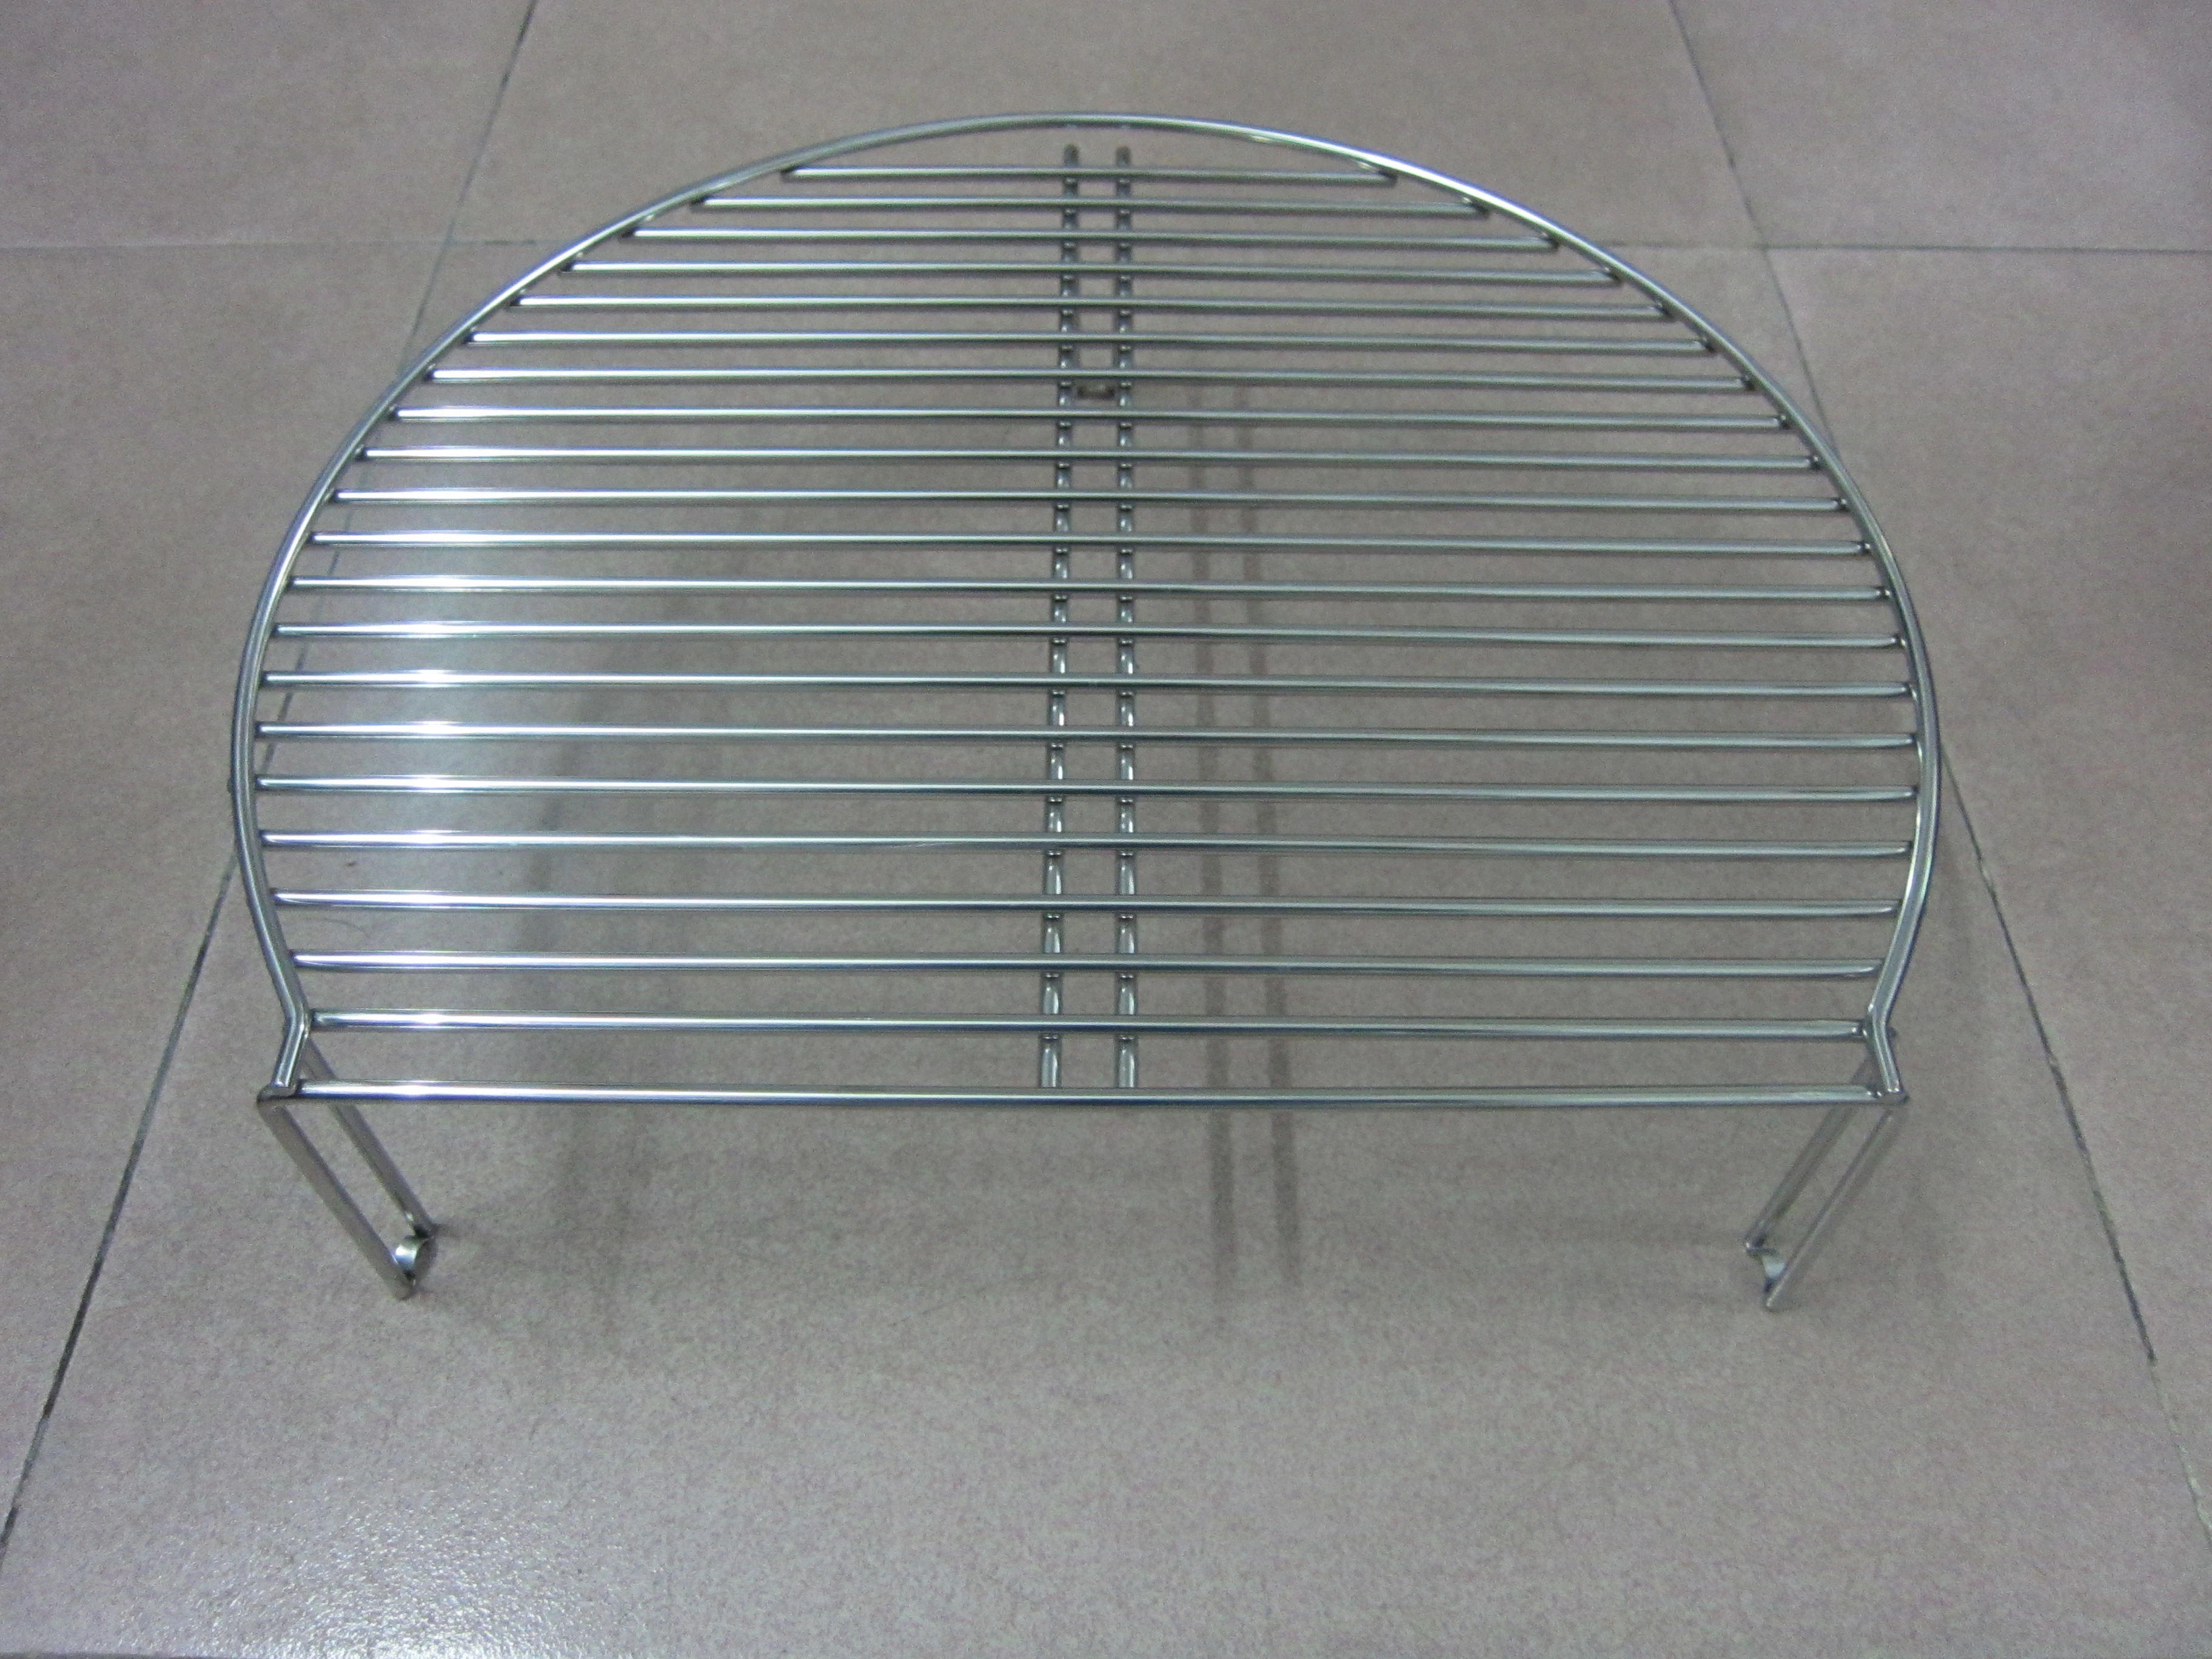 Grill expander Cooking Grate Stainless Steel Cooking Grate Cooking grill Original Manufacturer